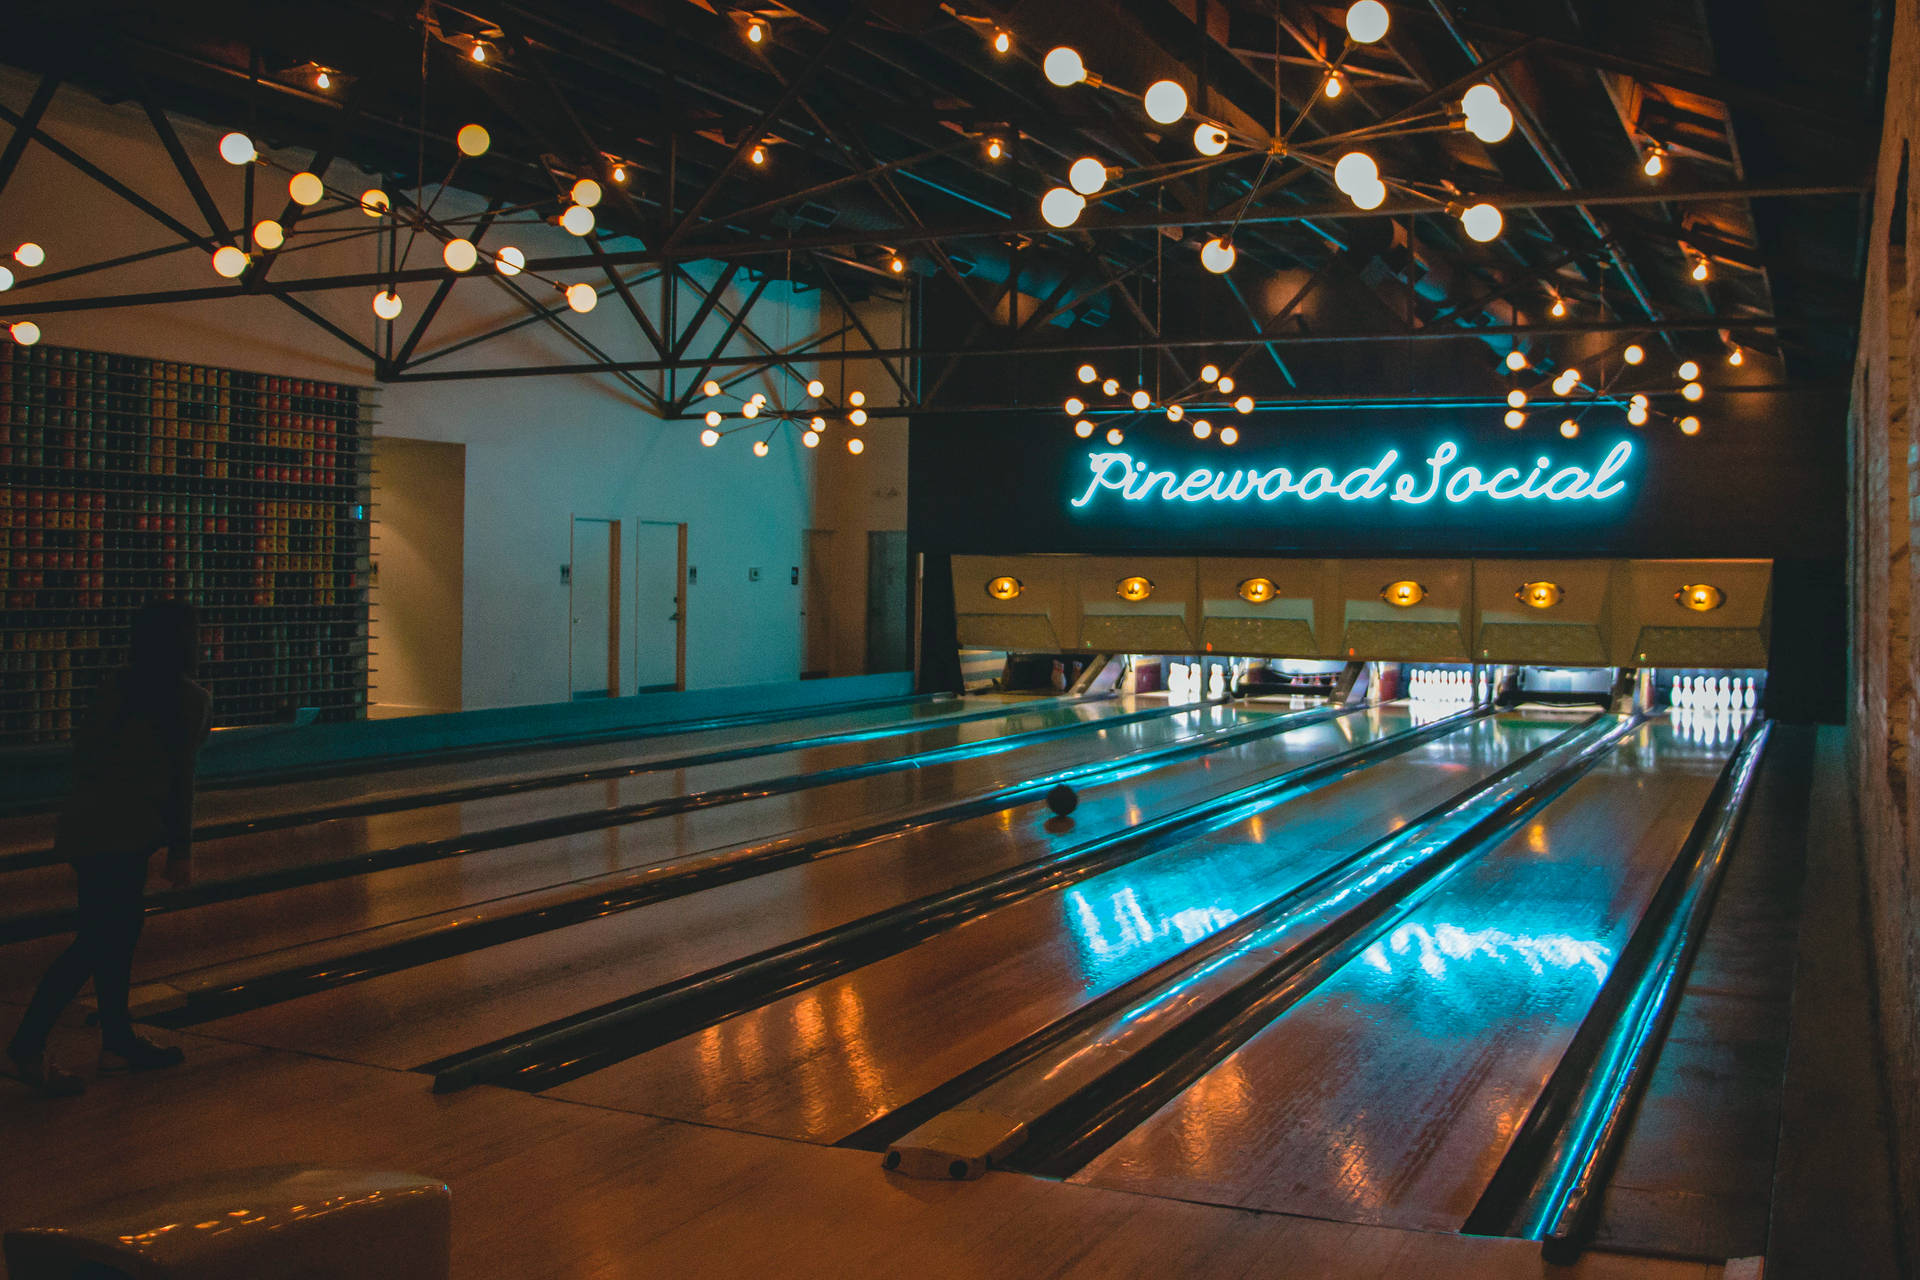 Pinewood Social Bowling Center Background